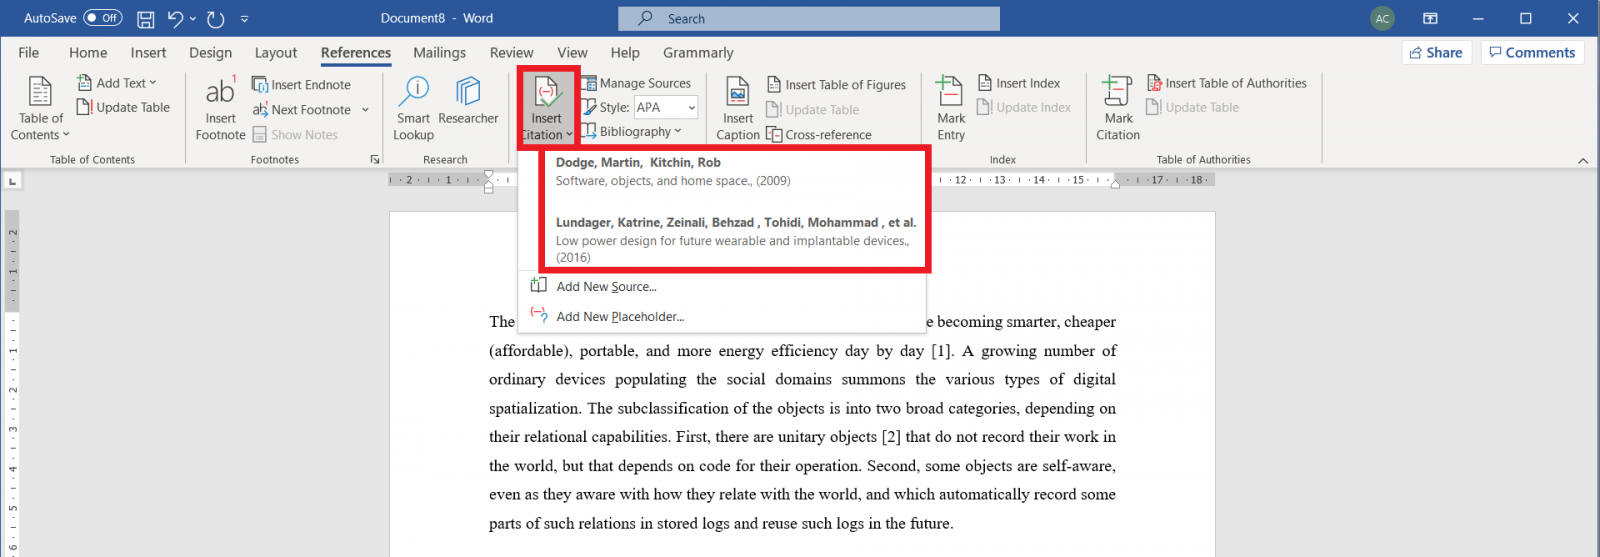 Microsoft Word Reference Tab Insert Citation Reference Listing